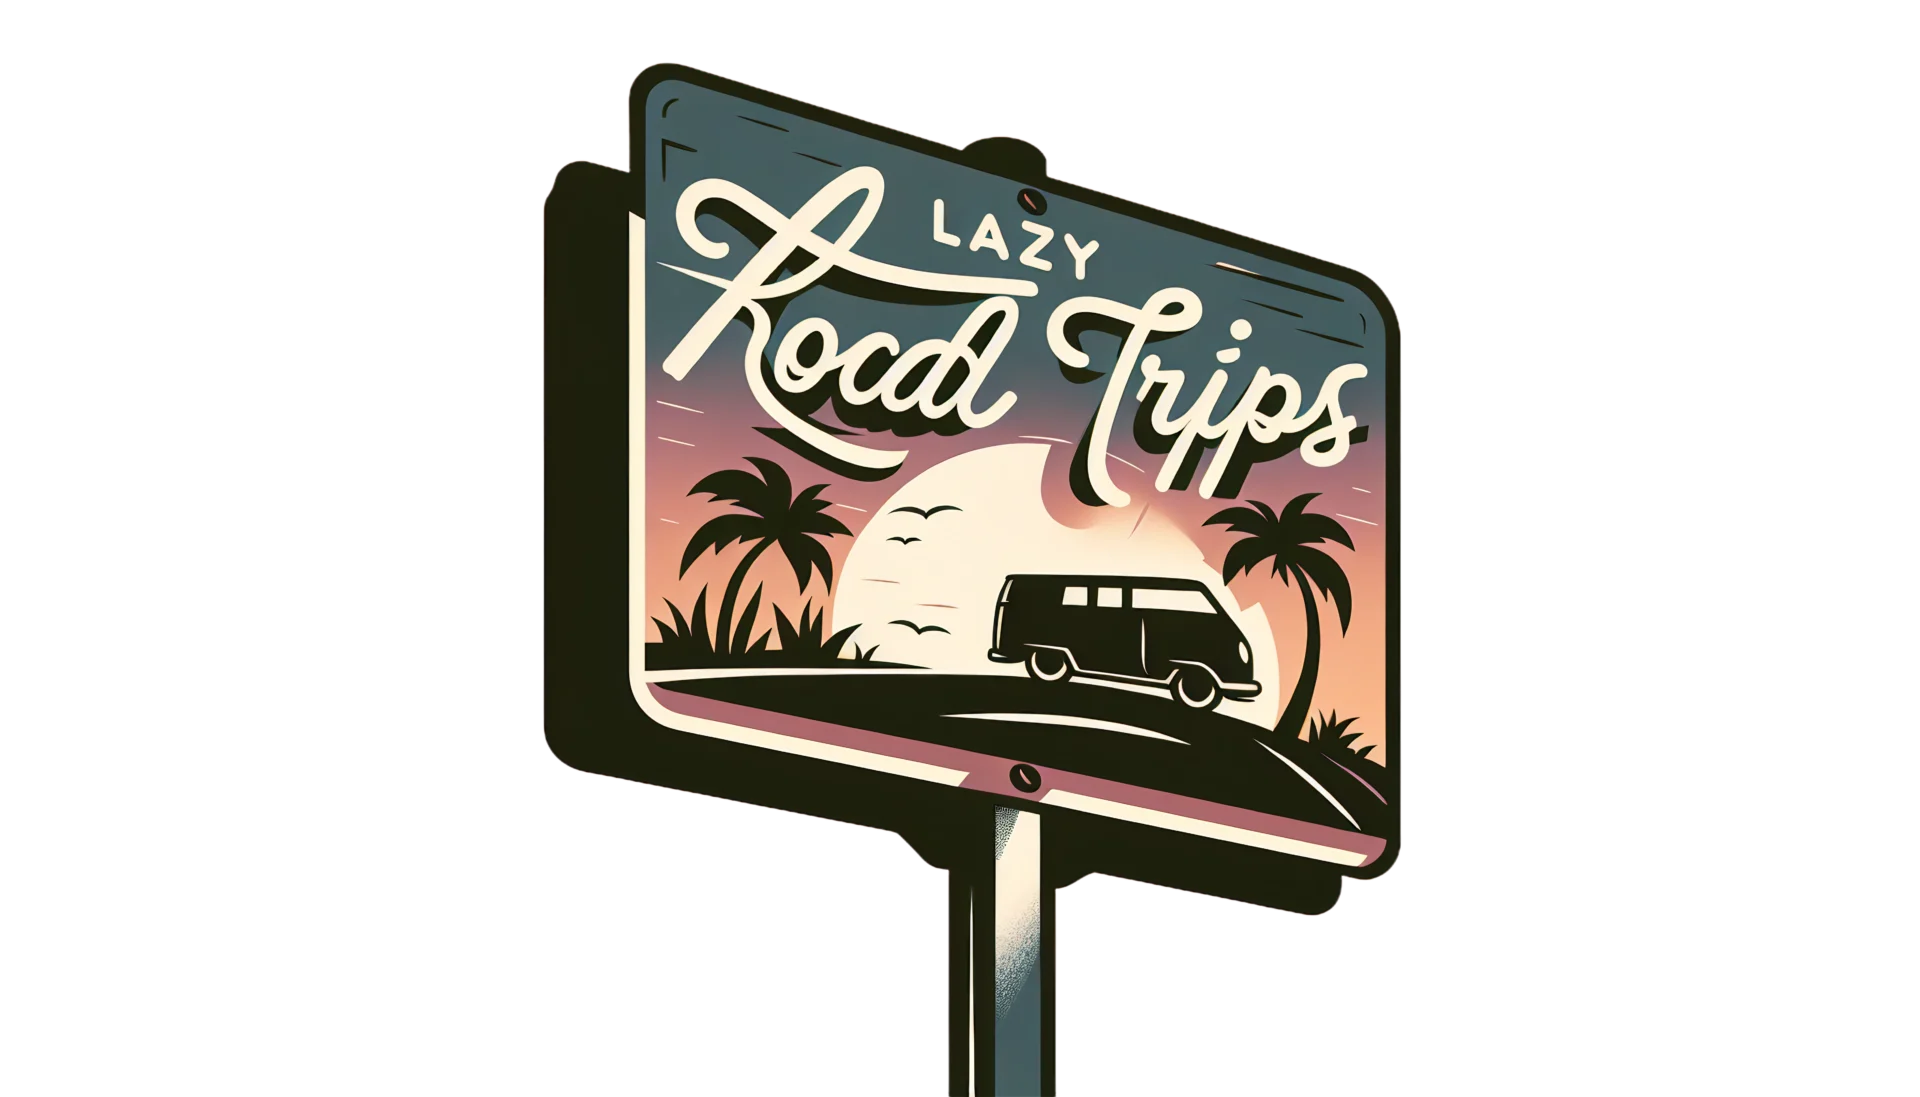 Illuminated signboard with "lazy local trips" text and an illustration of a van and palm trees against a sunset background.